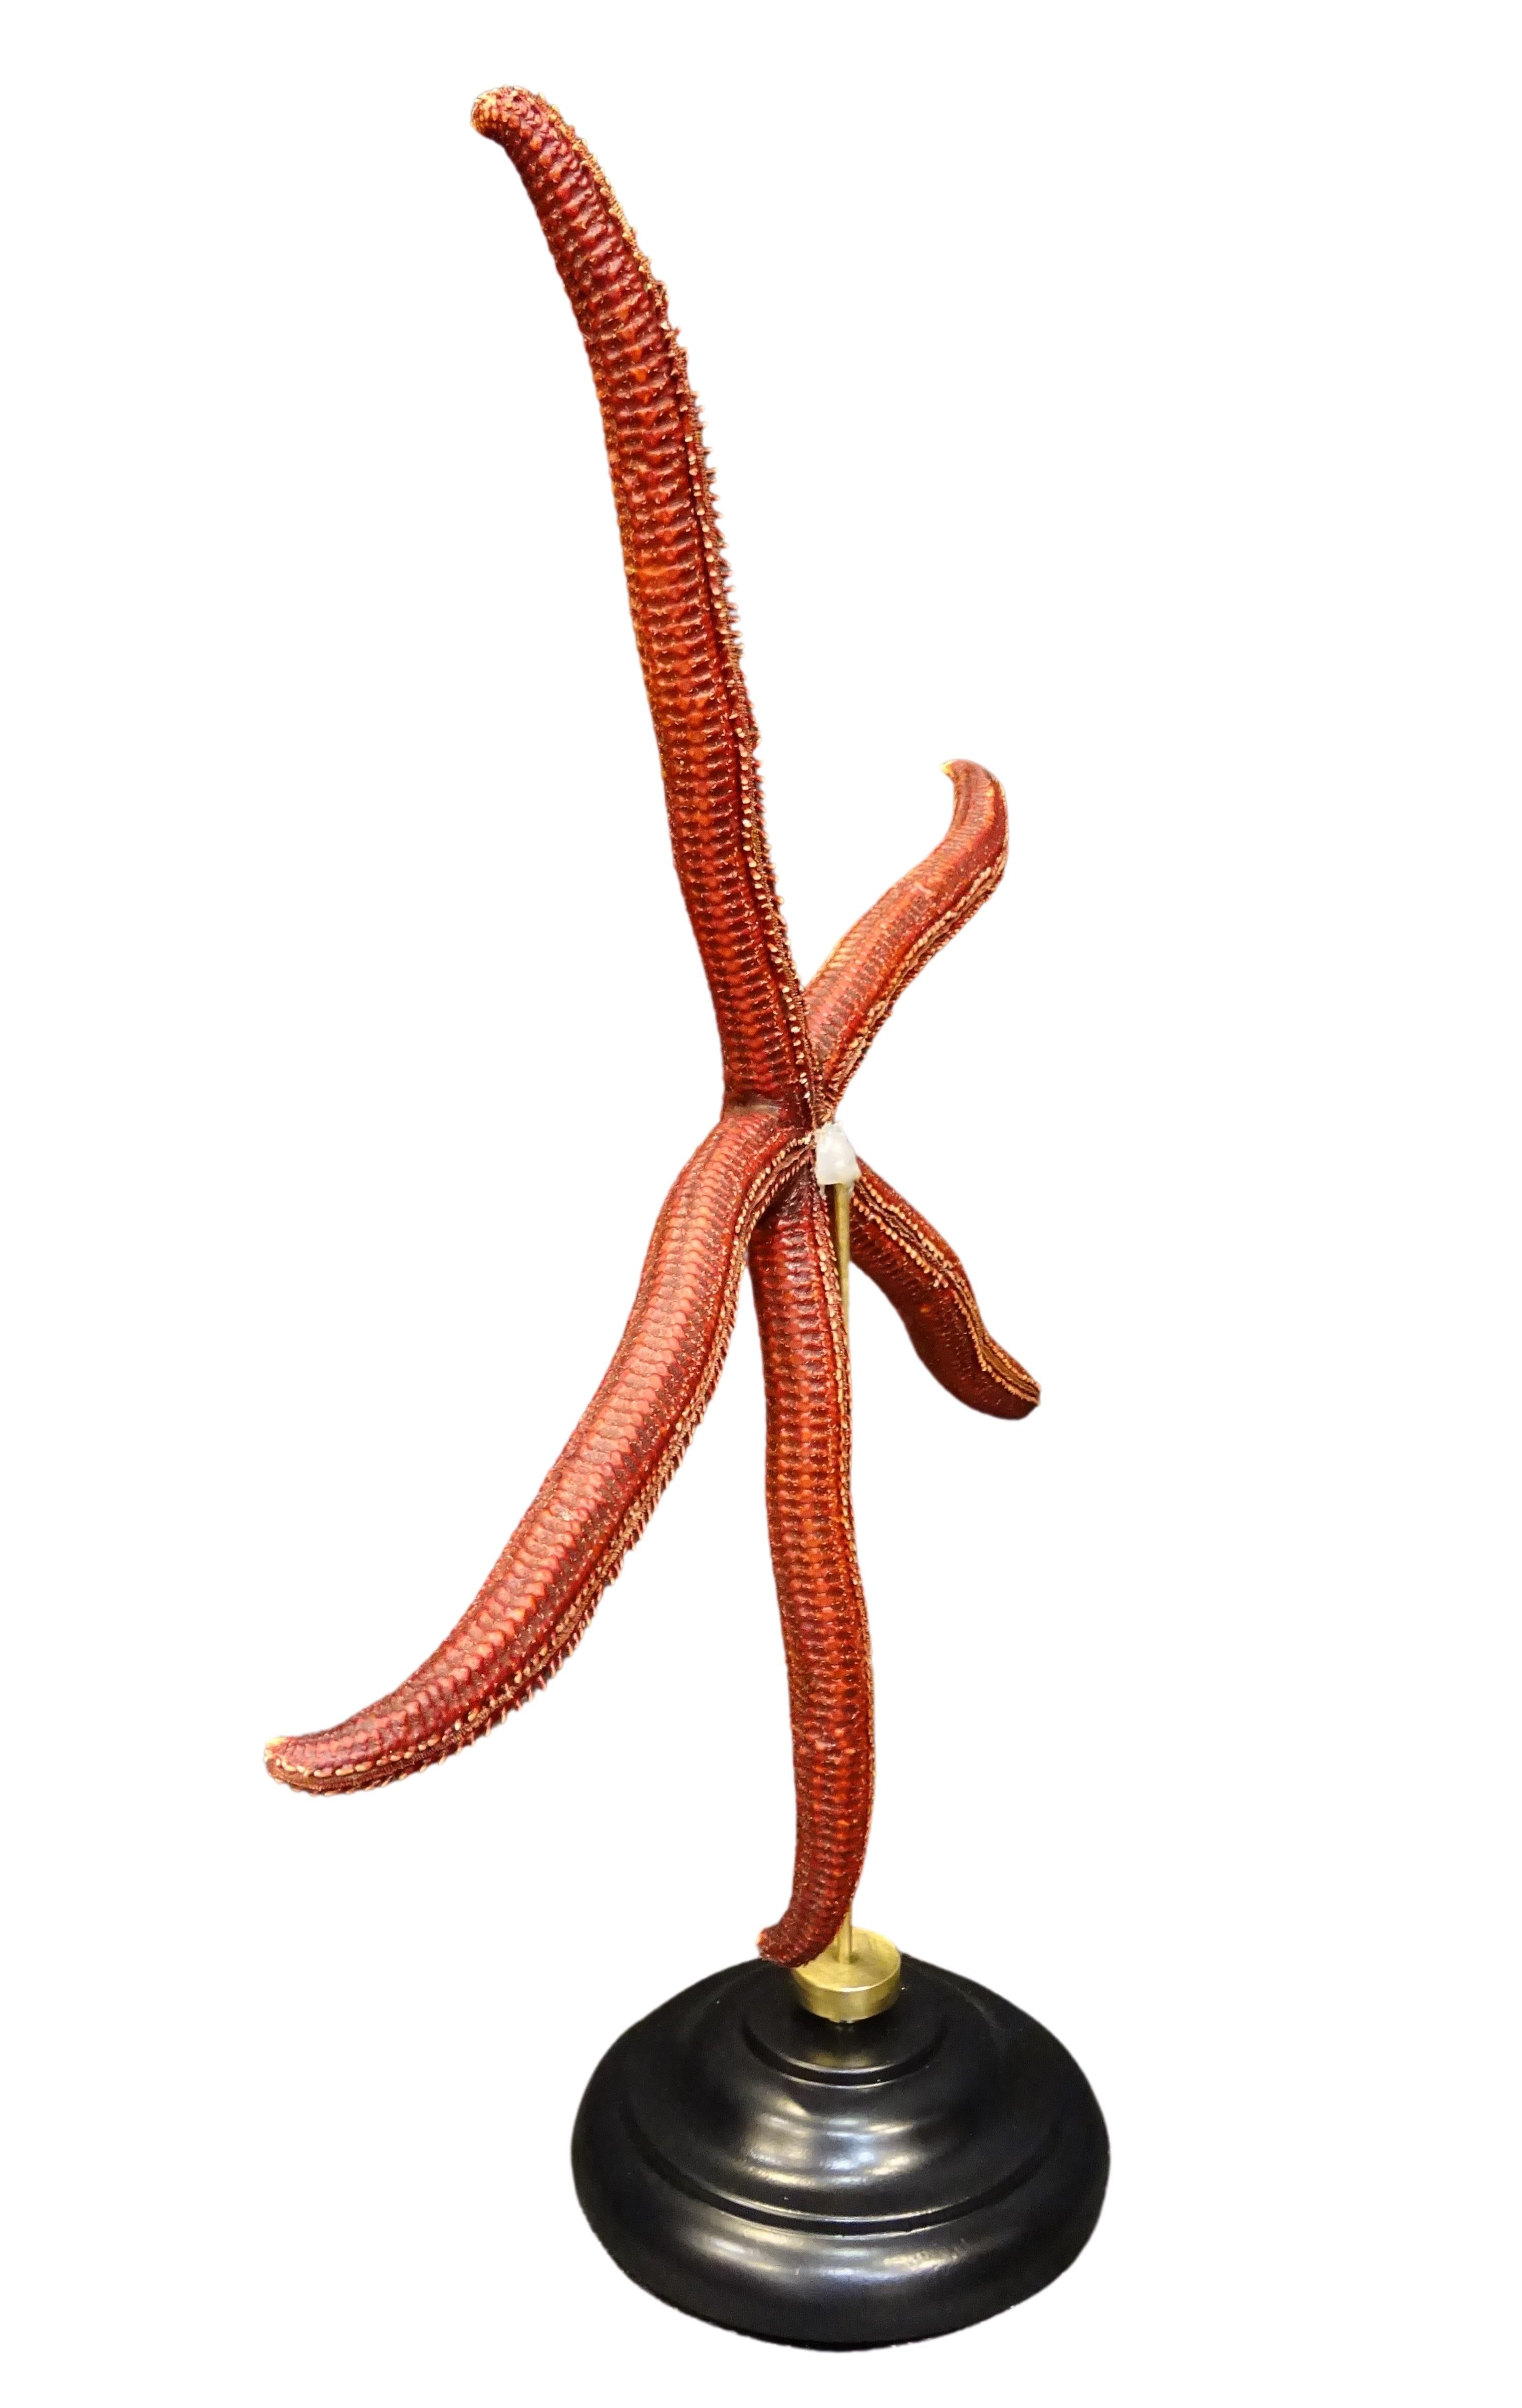 Ophidiaster ophidianus, measures: 495 × 418 × 140 mm, 576 g weight
2018, Océano Pacífico
Red extra-size starfish!
A fantastic specimen of Ophidiaster ophidianus caught in the Solomon Islands, was dried and then mounted on an elegant wooden